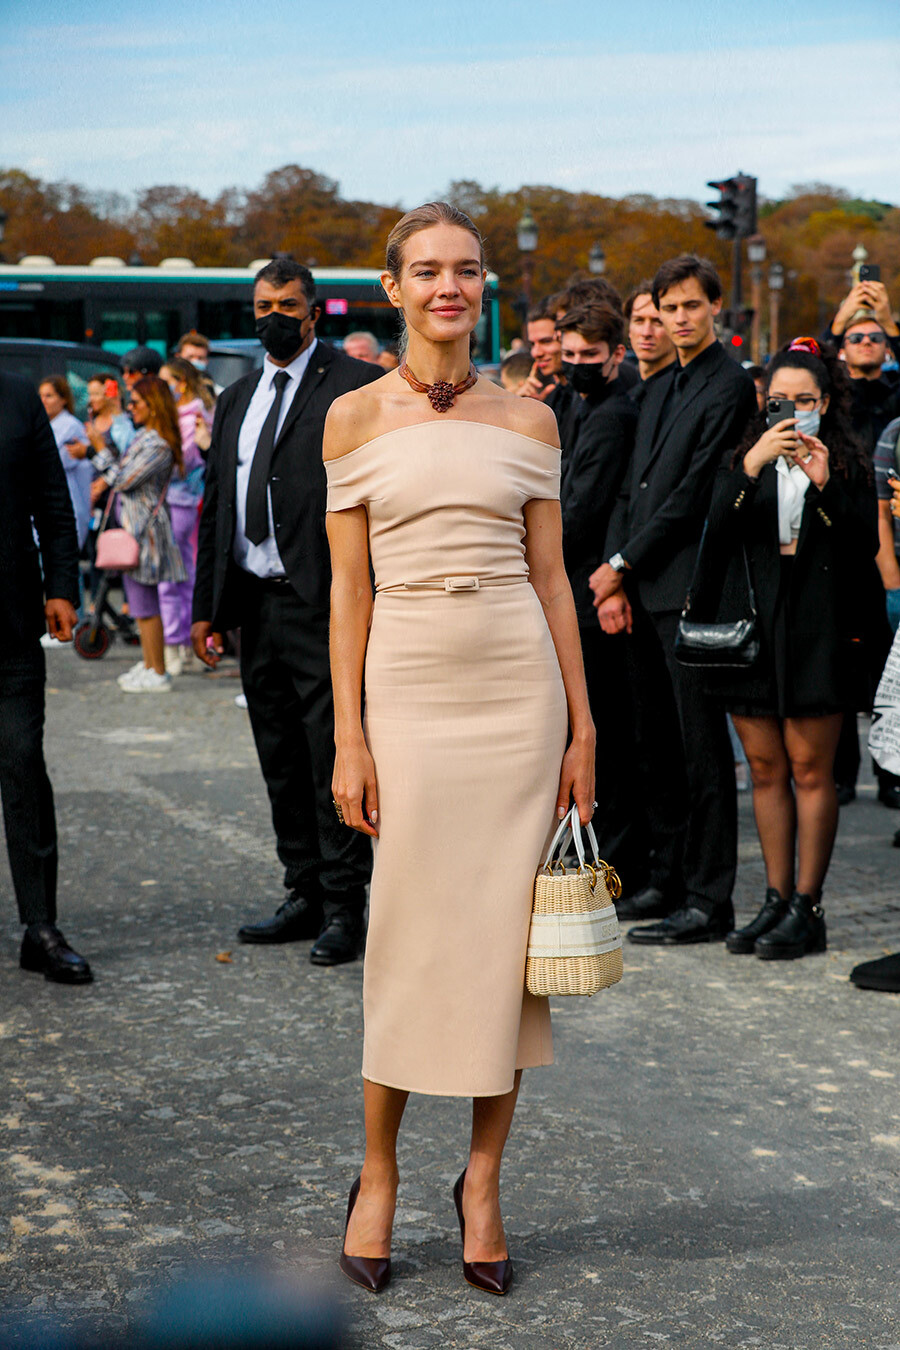 Natalia Vodianova Marries The Heir of LVMH In A Chic